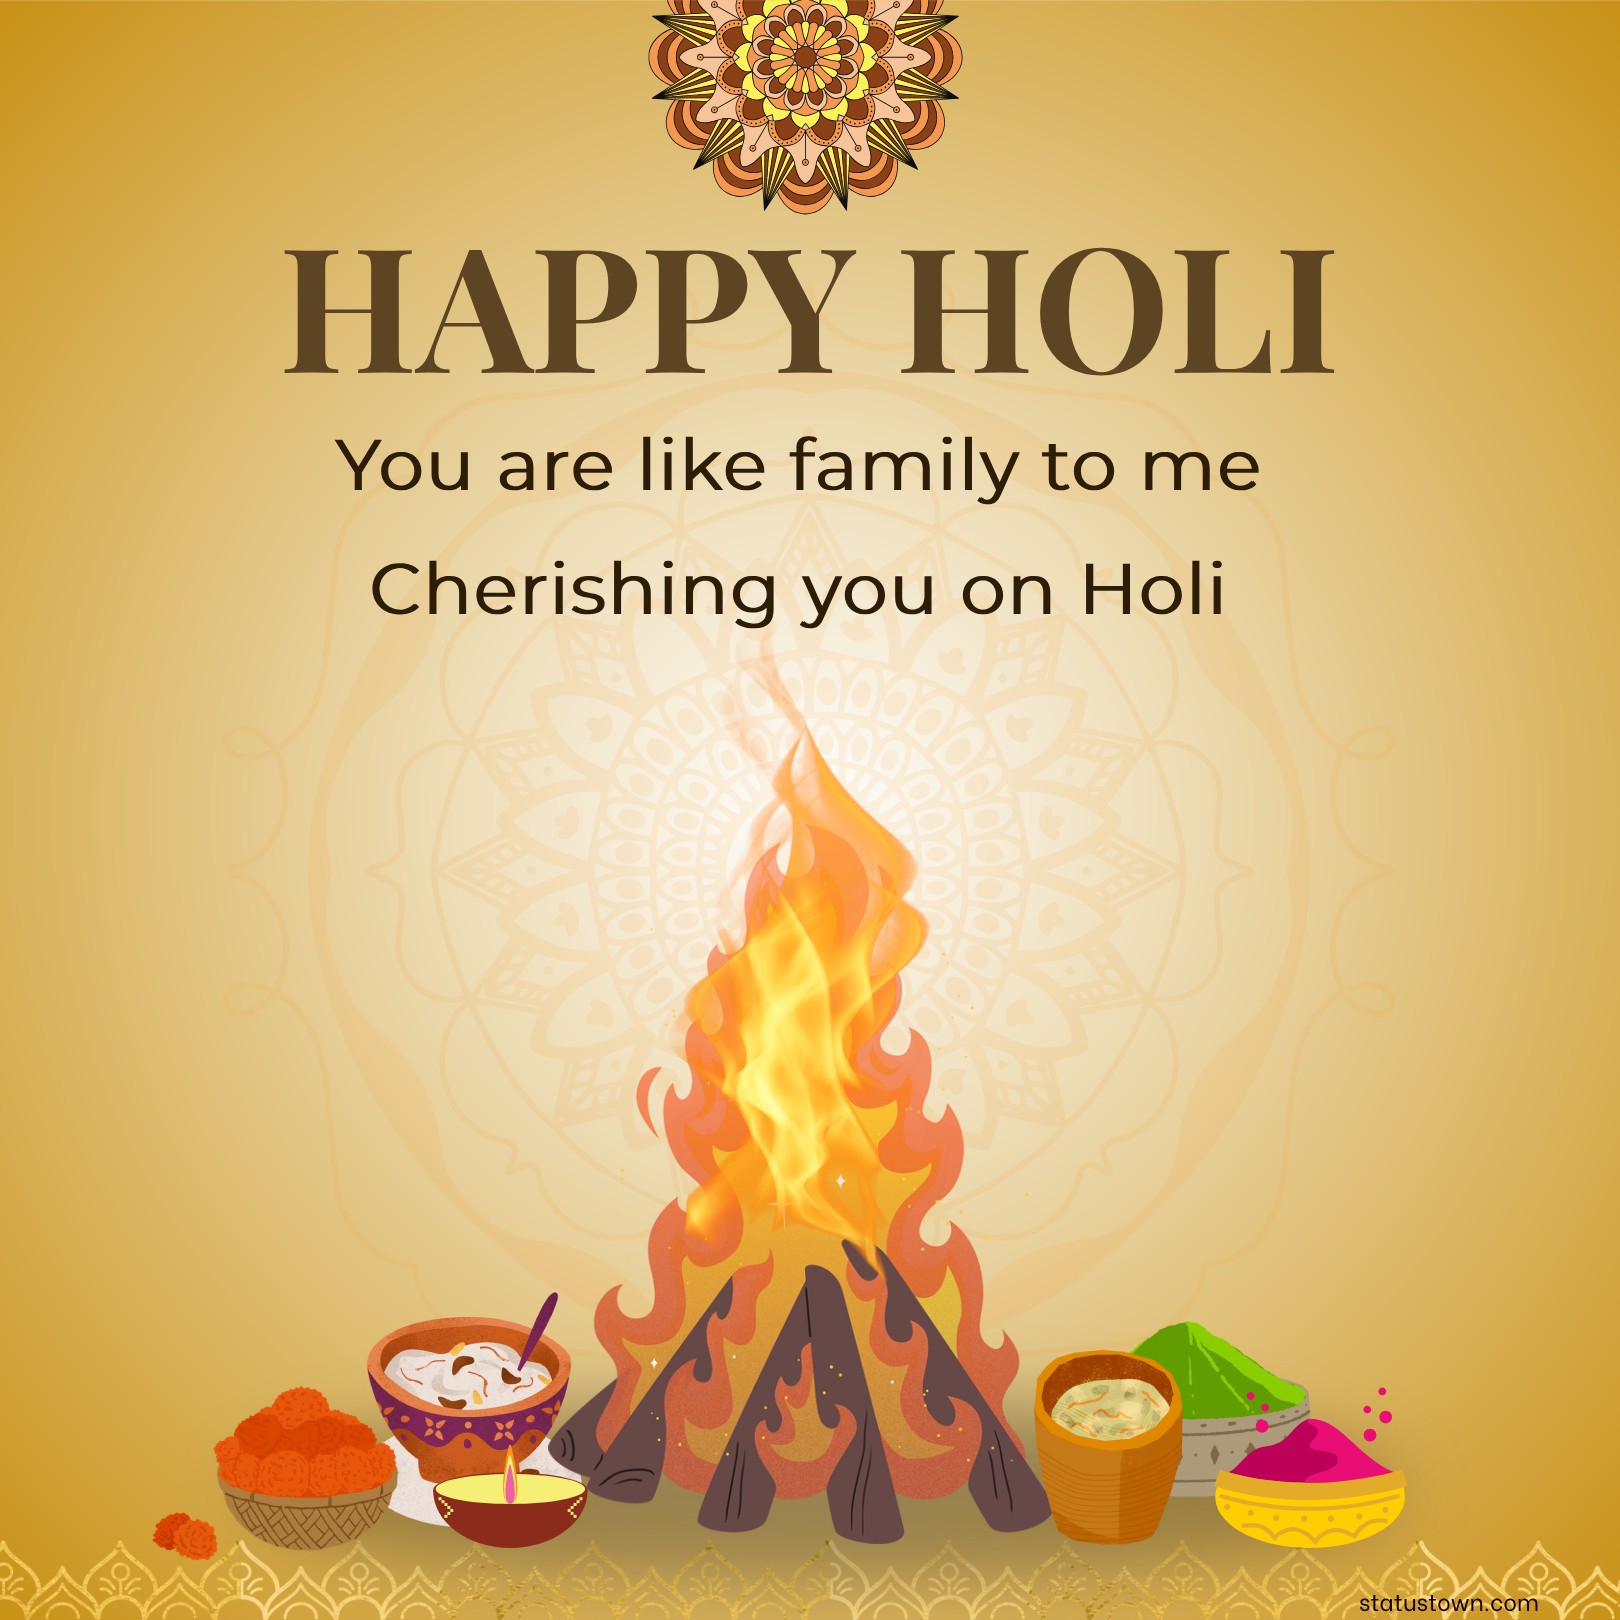 You are like family to me. Cherishing you on Holi! - Holi Wishes wishes, messages, and status